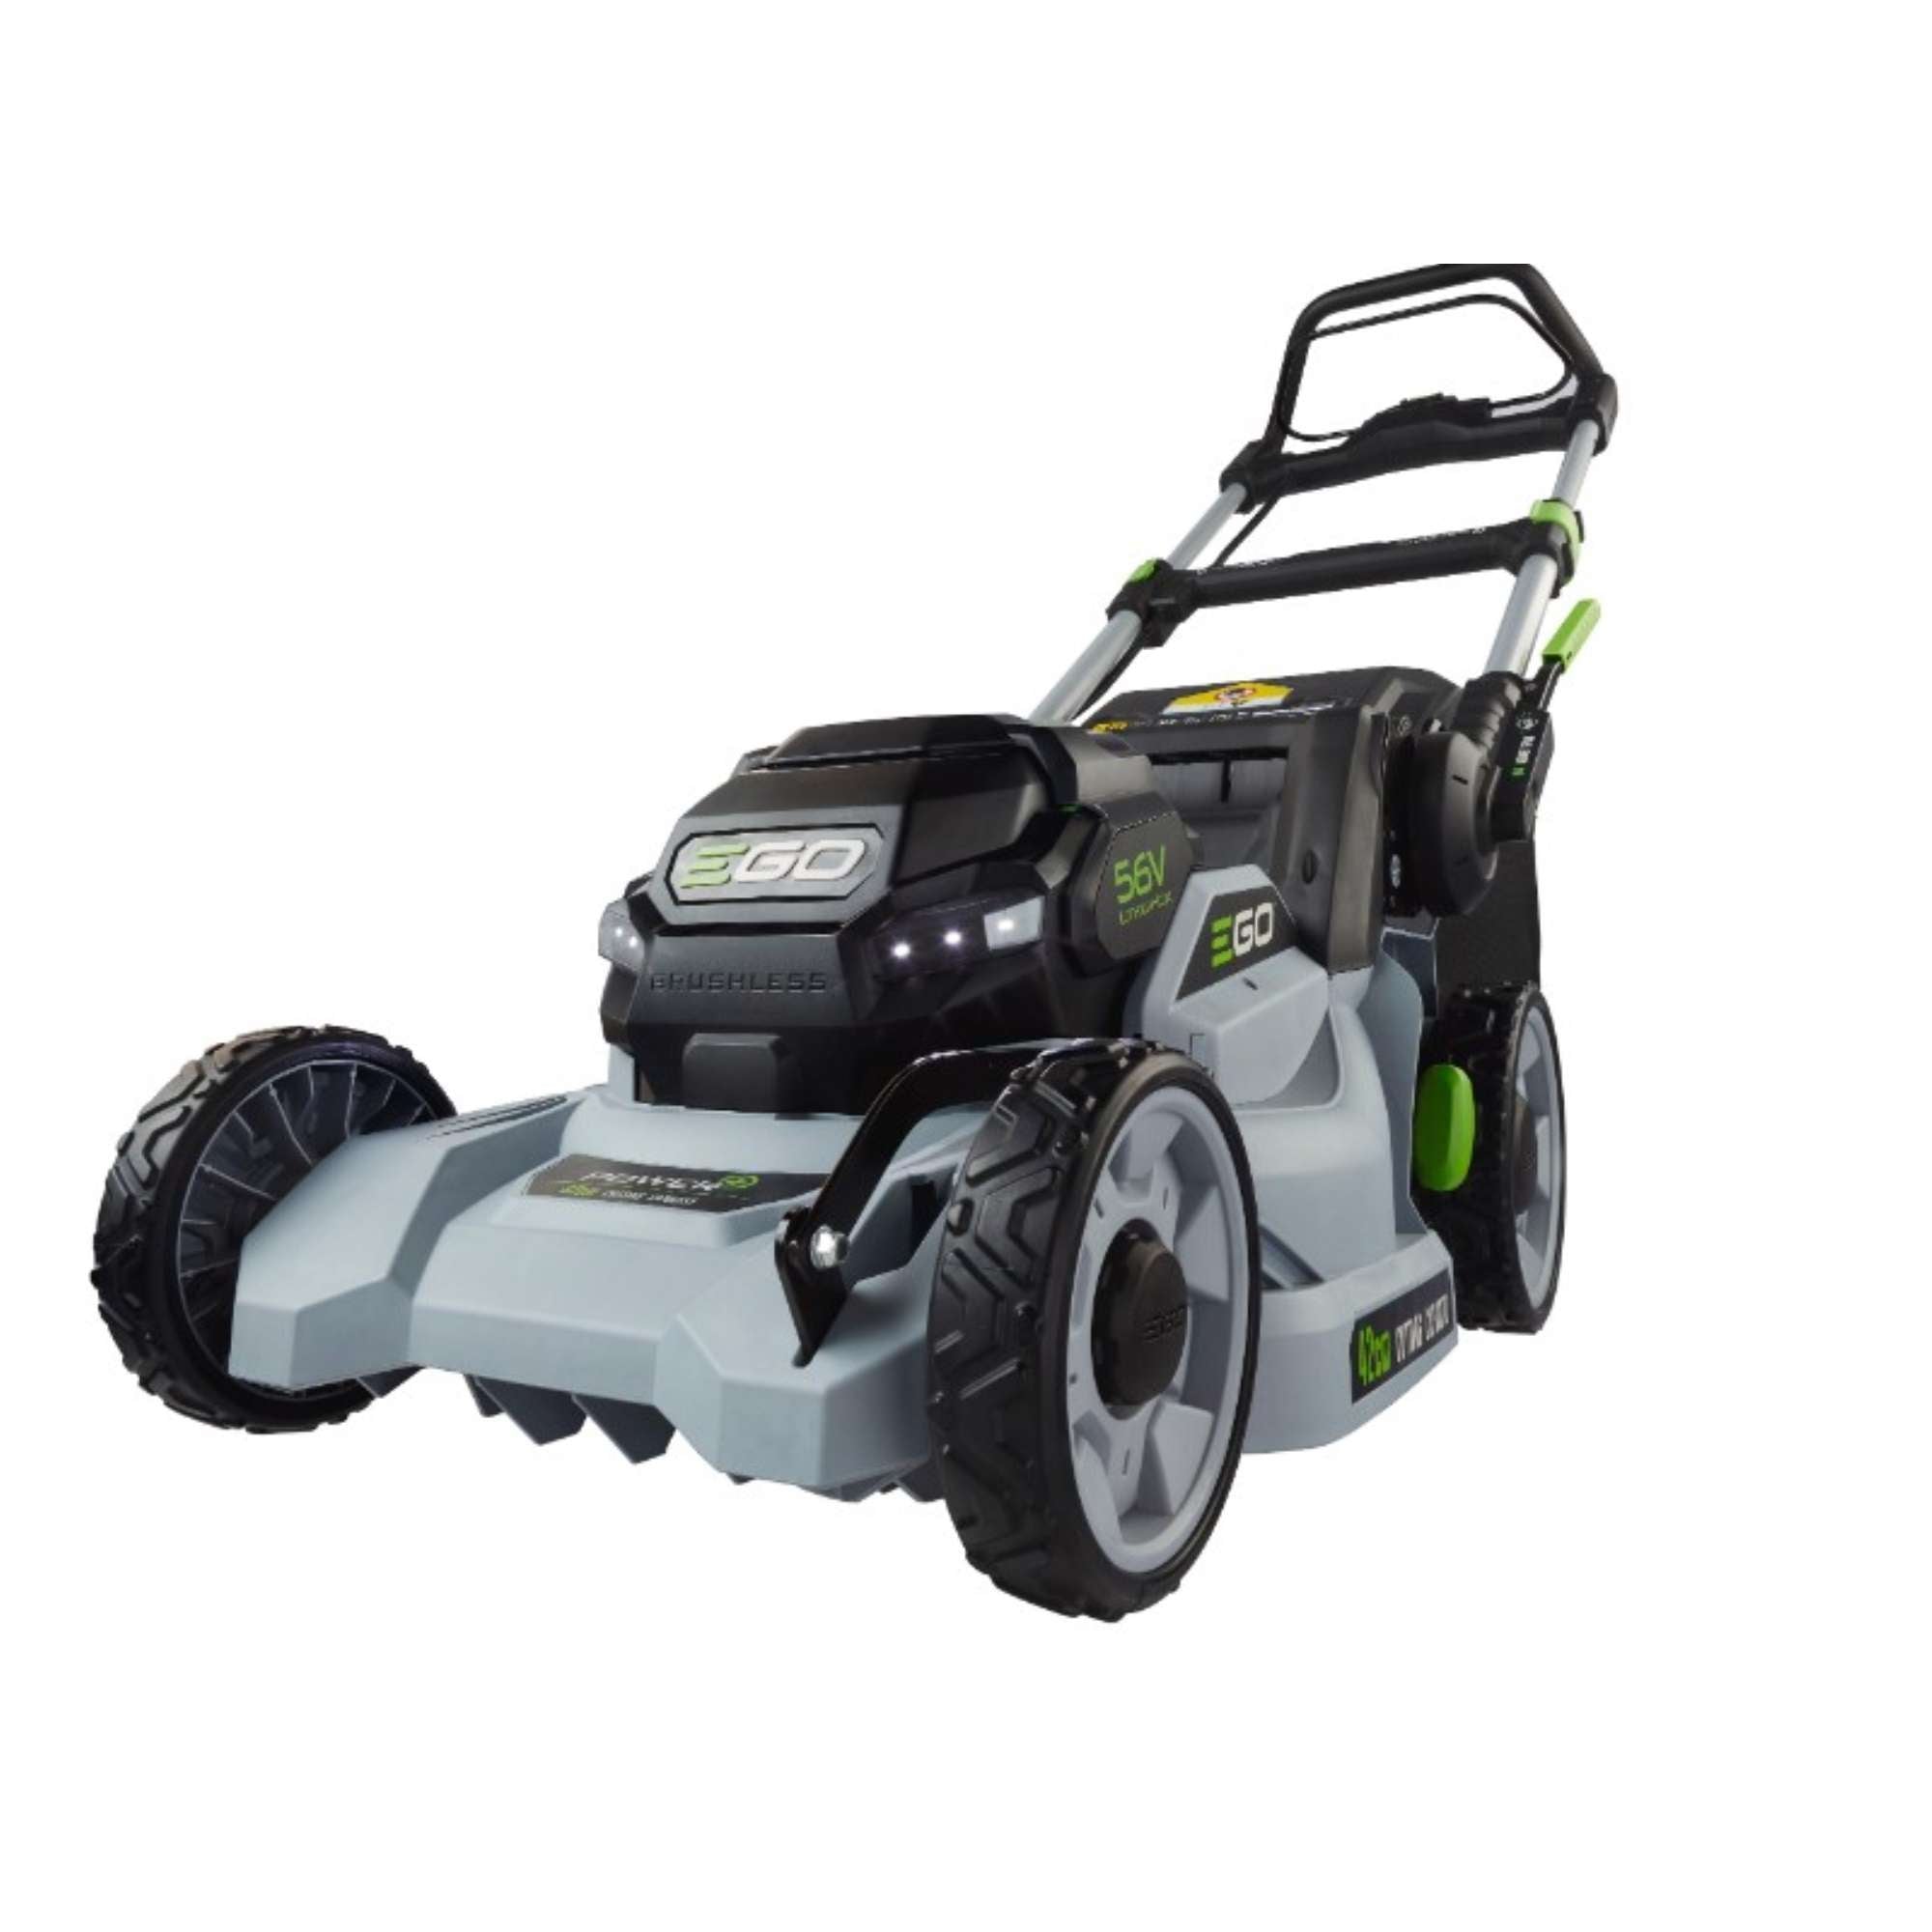 42cm mower kit + 2.5ah battery and charger - Ego 48205 LM1701E